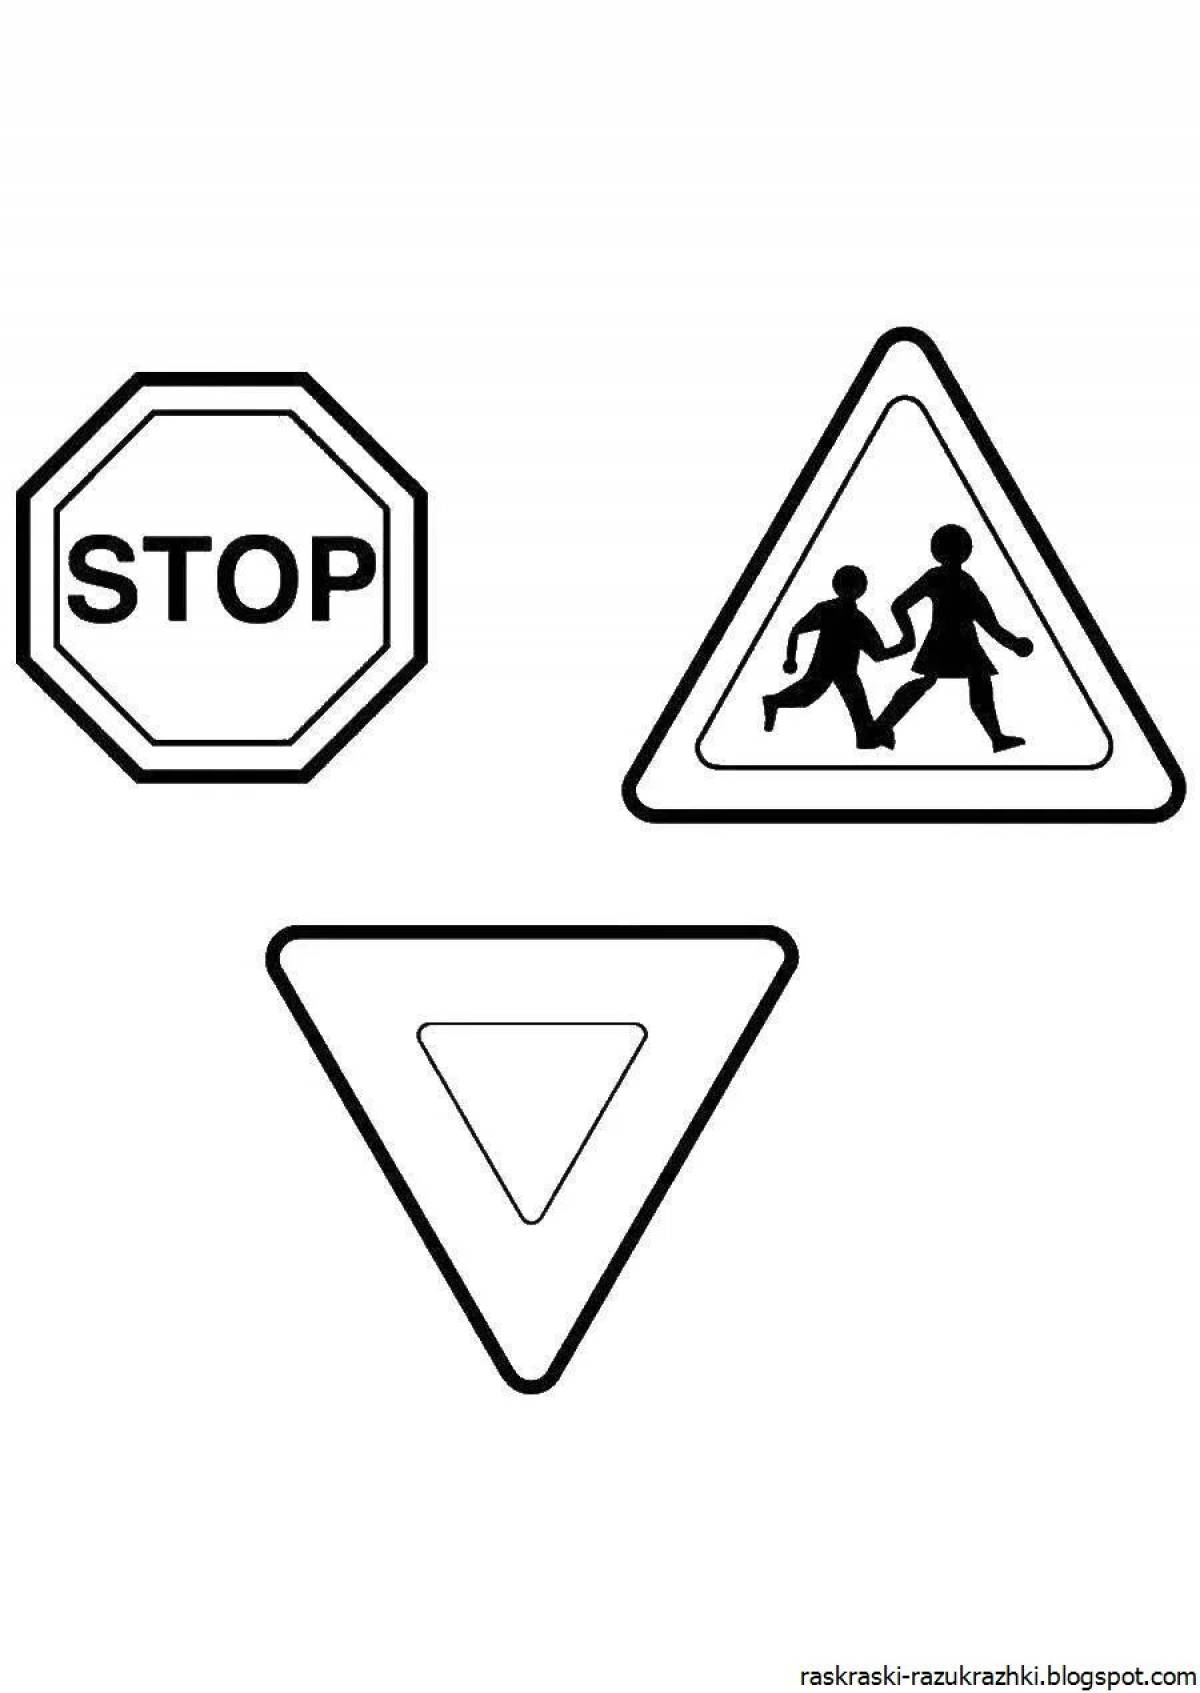 Coloring page funny street sign with names for kids